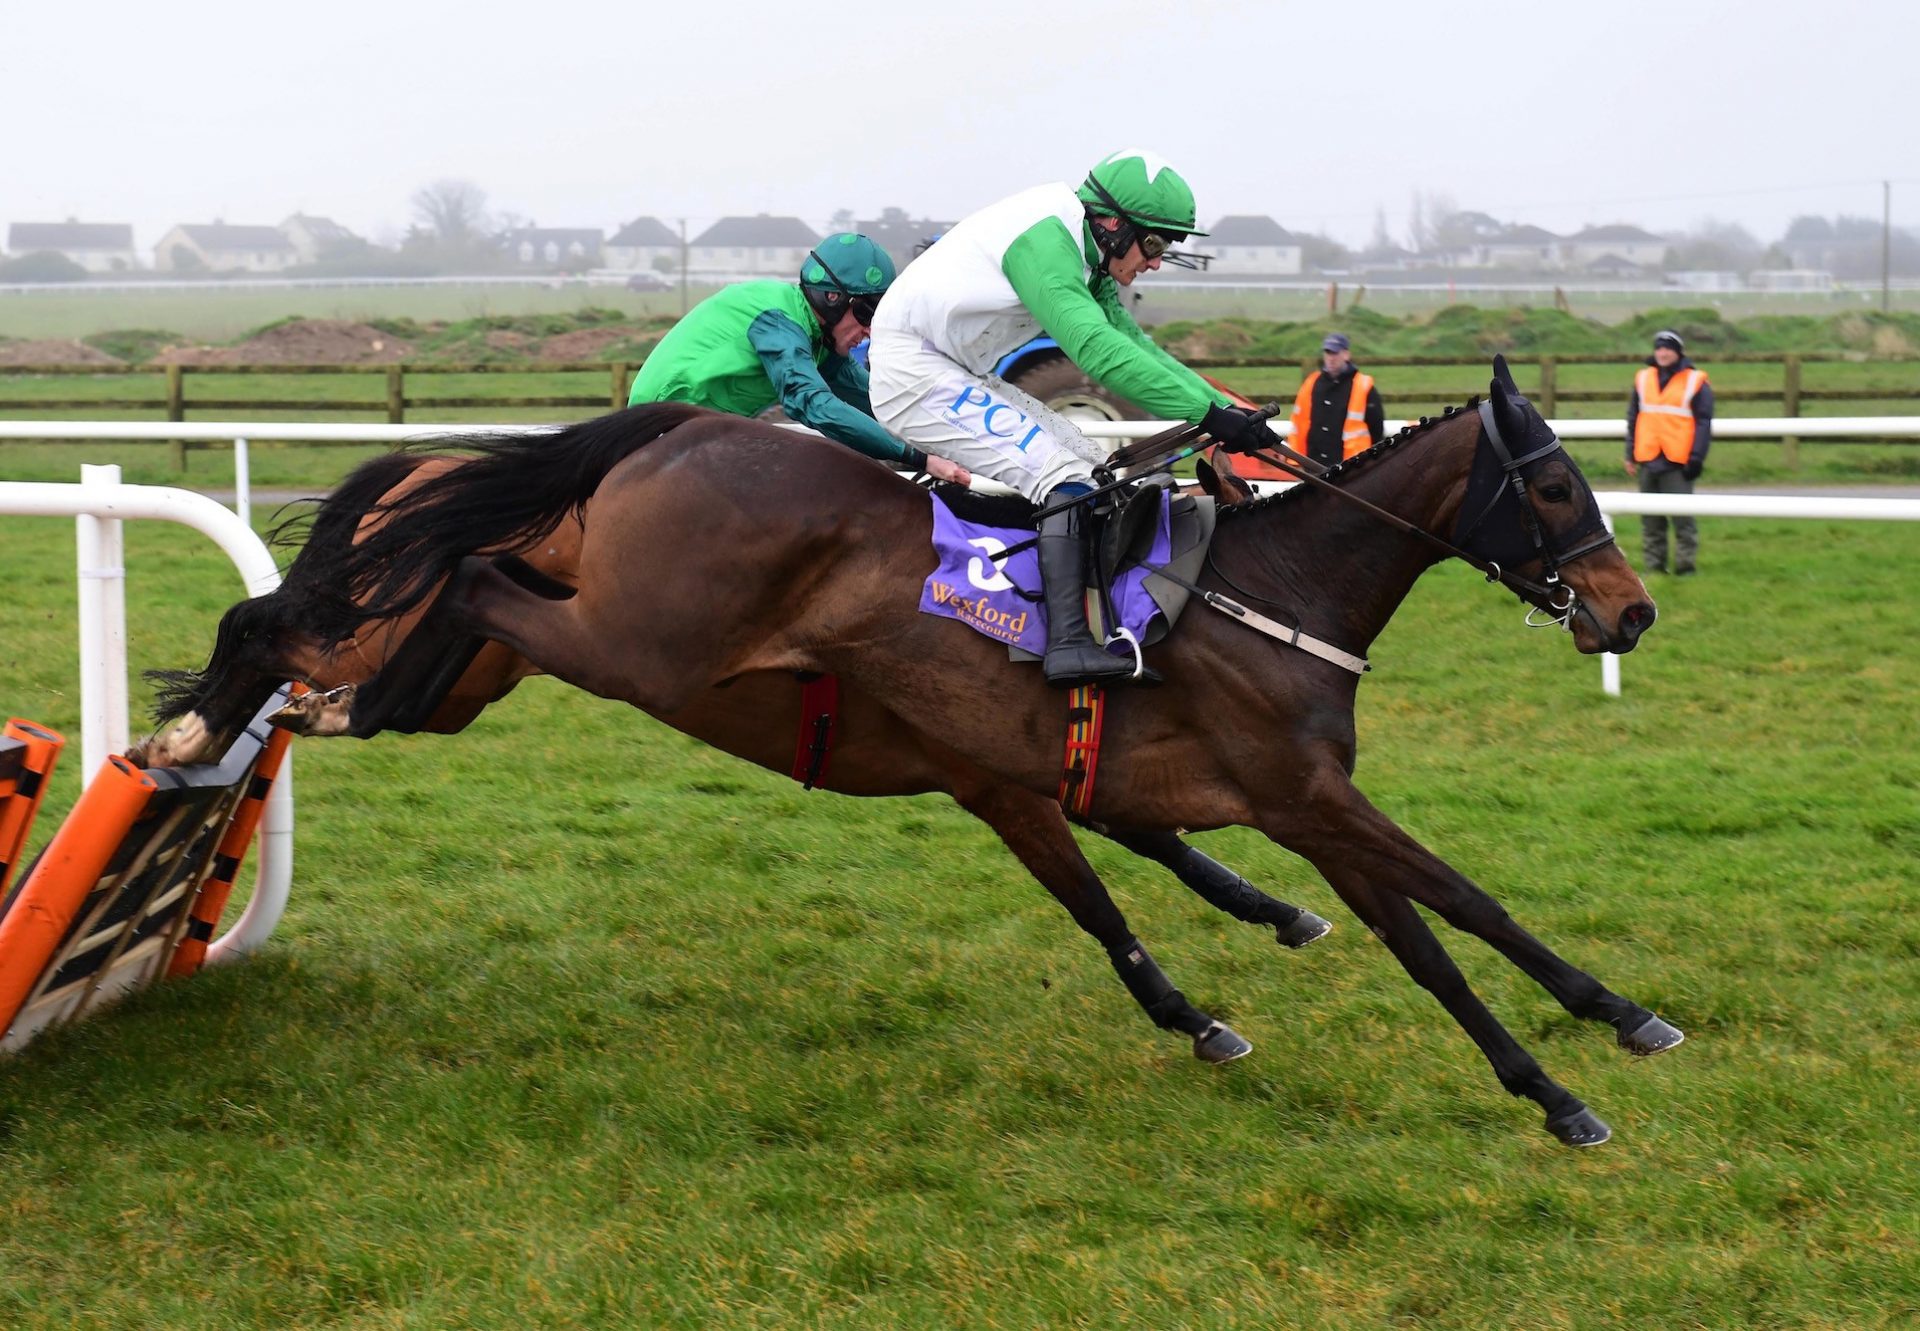 Getaway Gorgeous (Getaway) wins the Mares Maiden Hurdle at Wexford